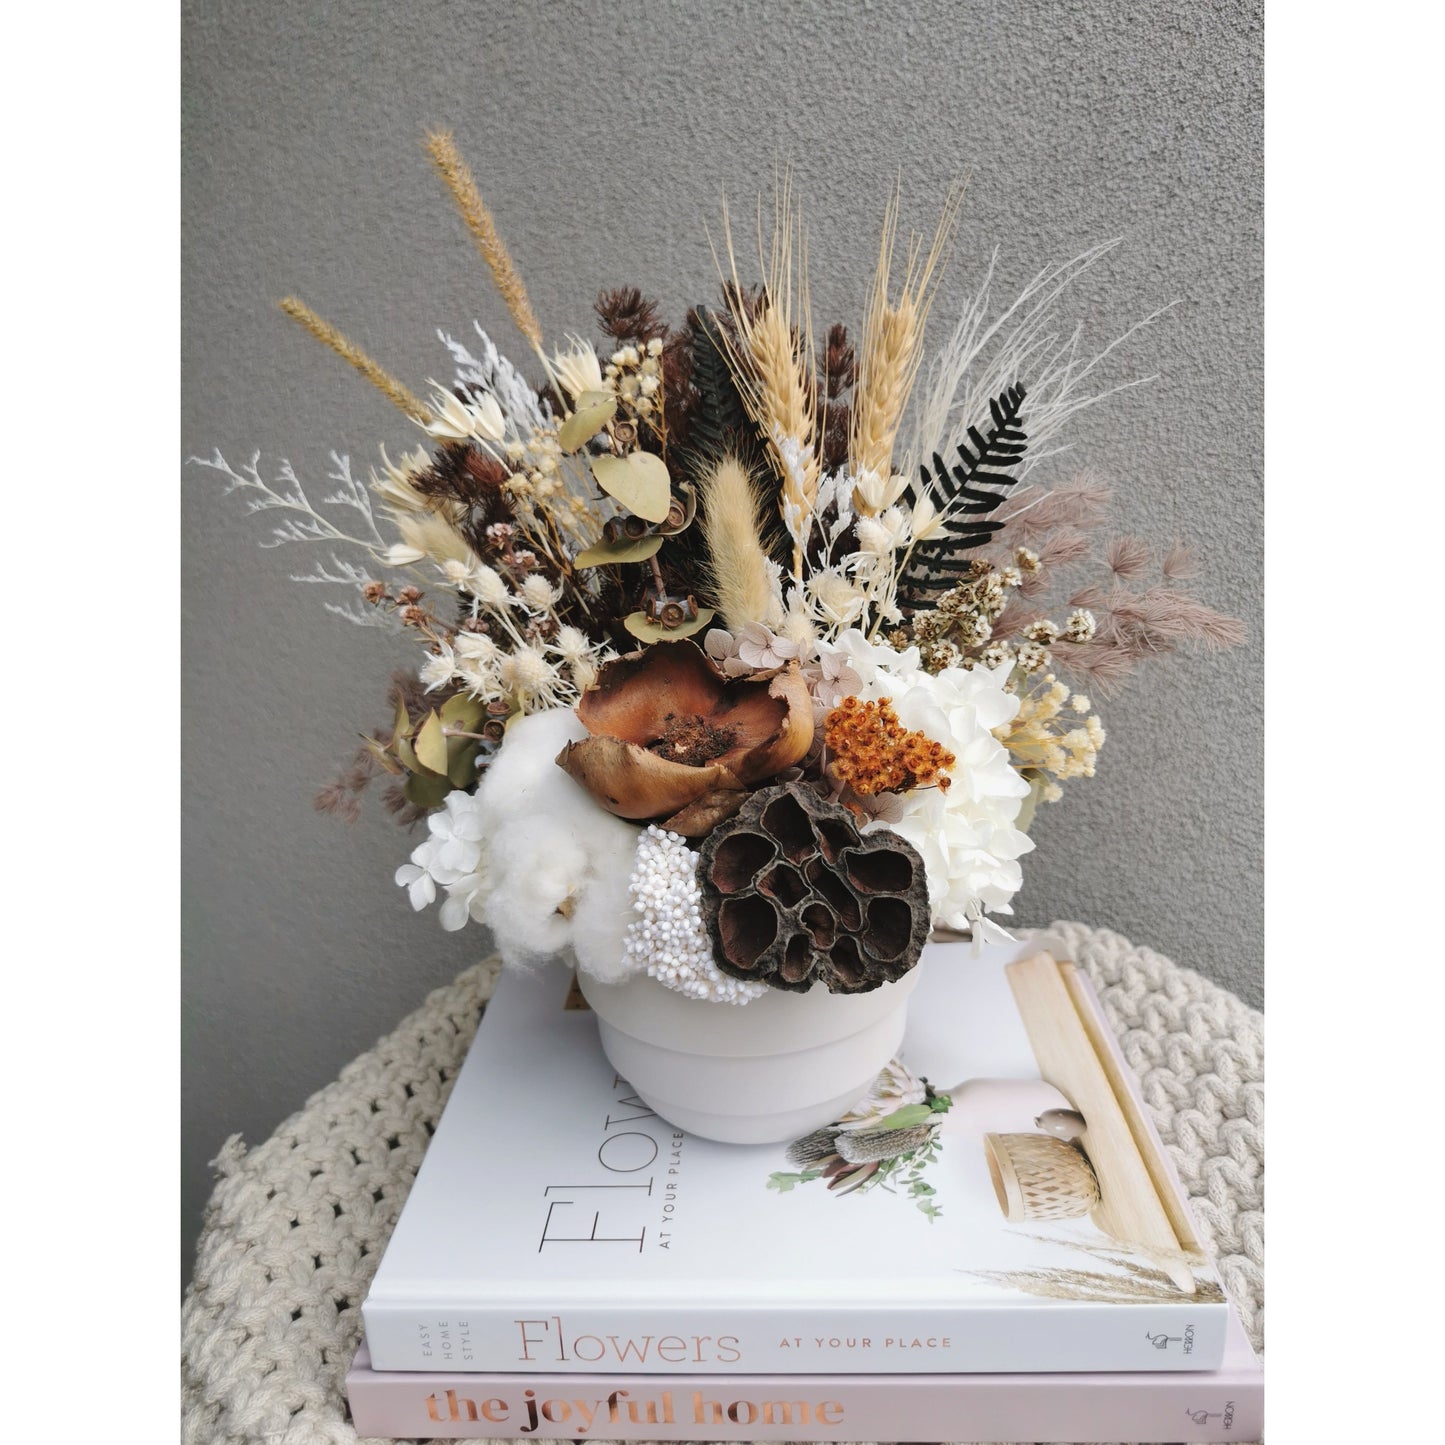 Dried & Preserved native flower arrangement in white pot. Picture shows flower arrangement sitting on a table against a blank wall